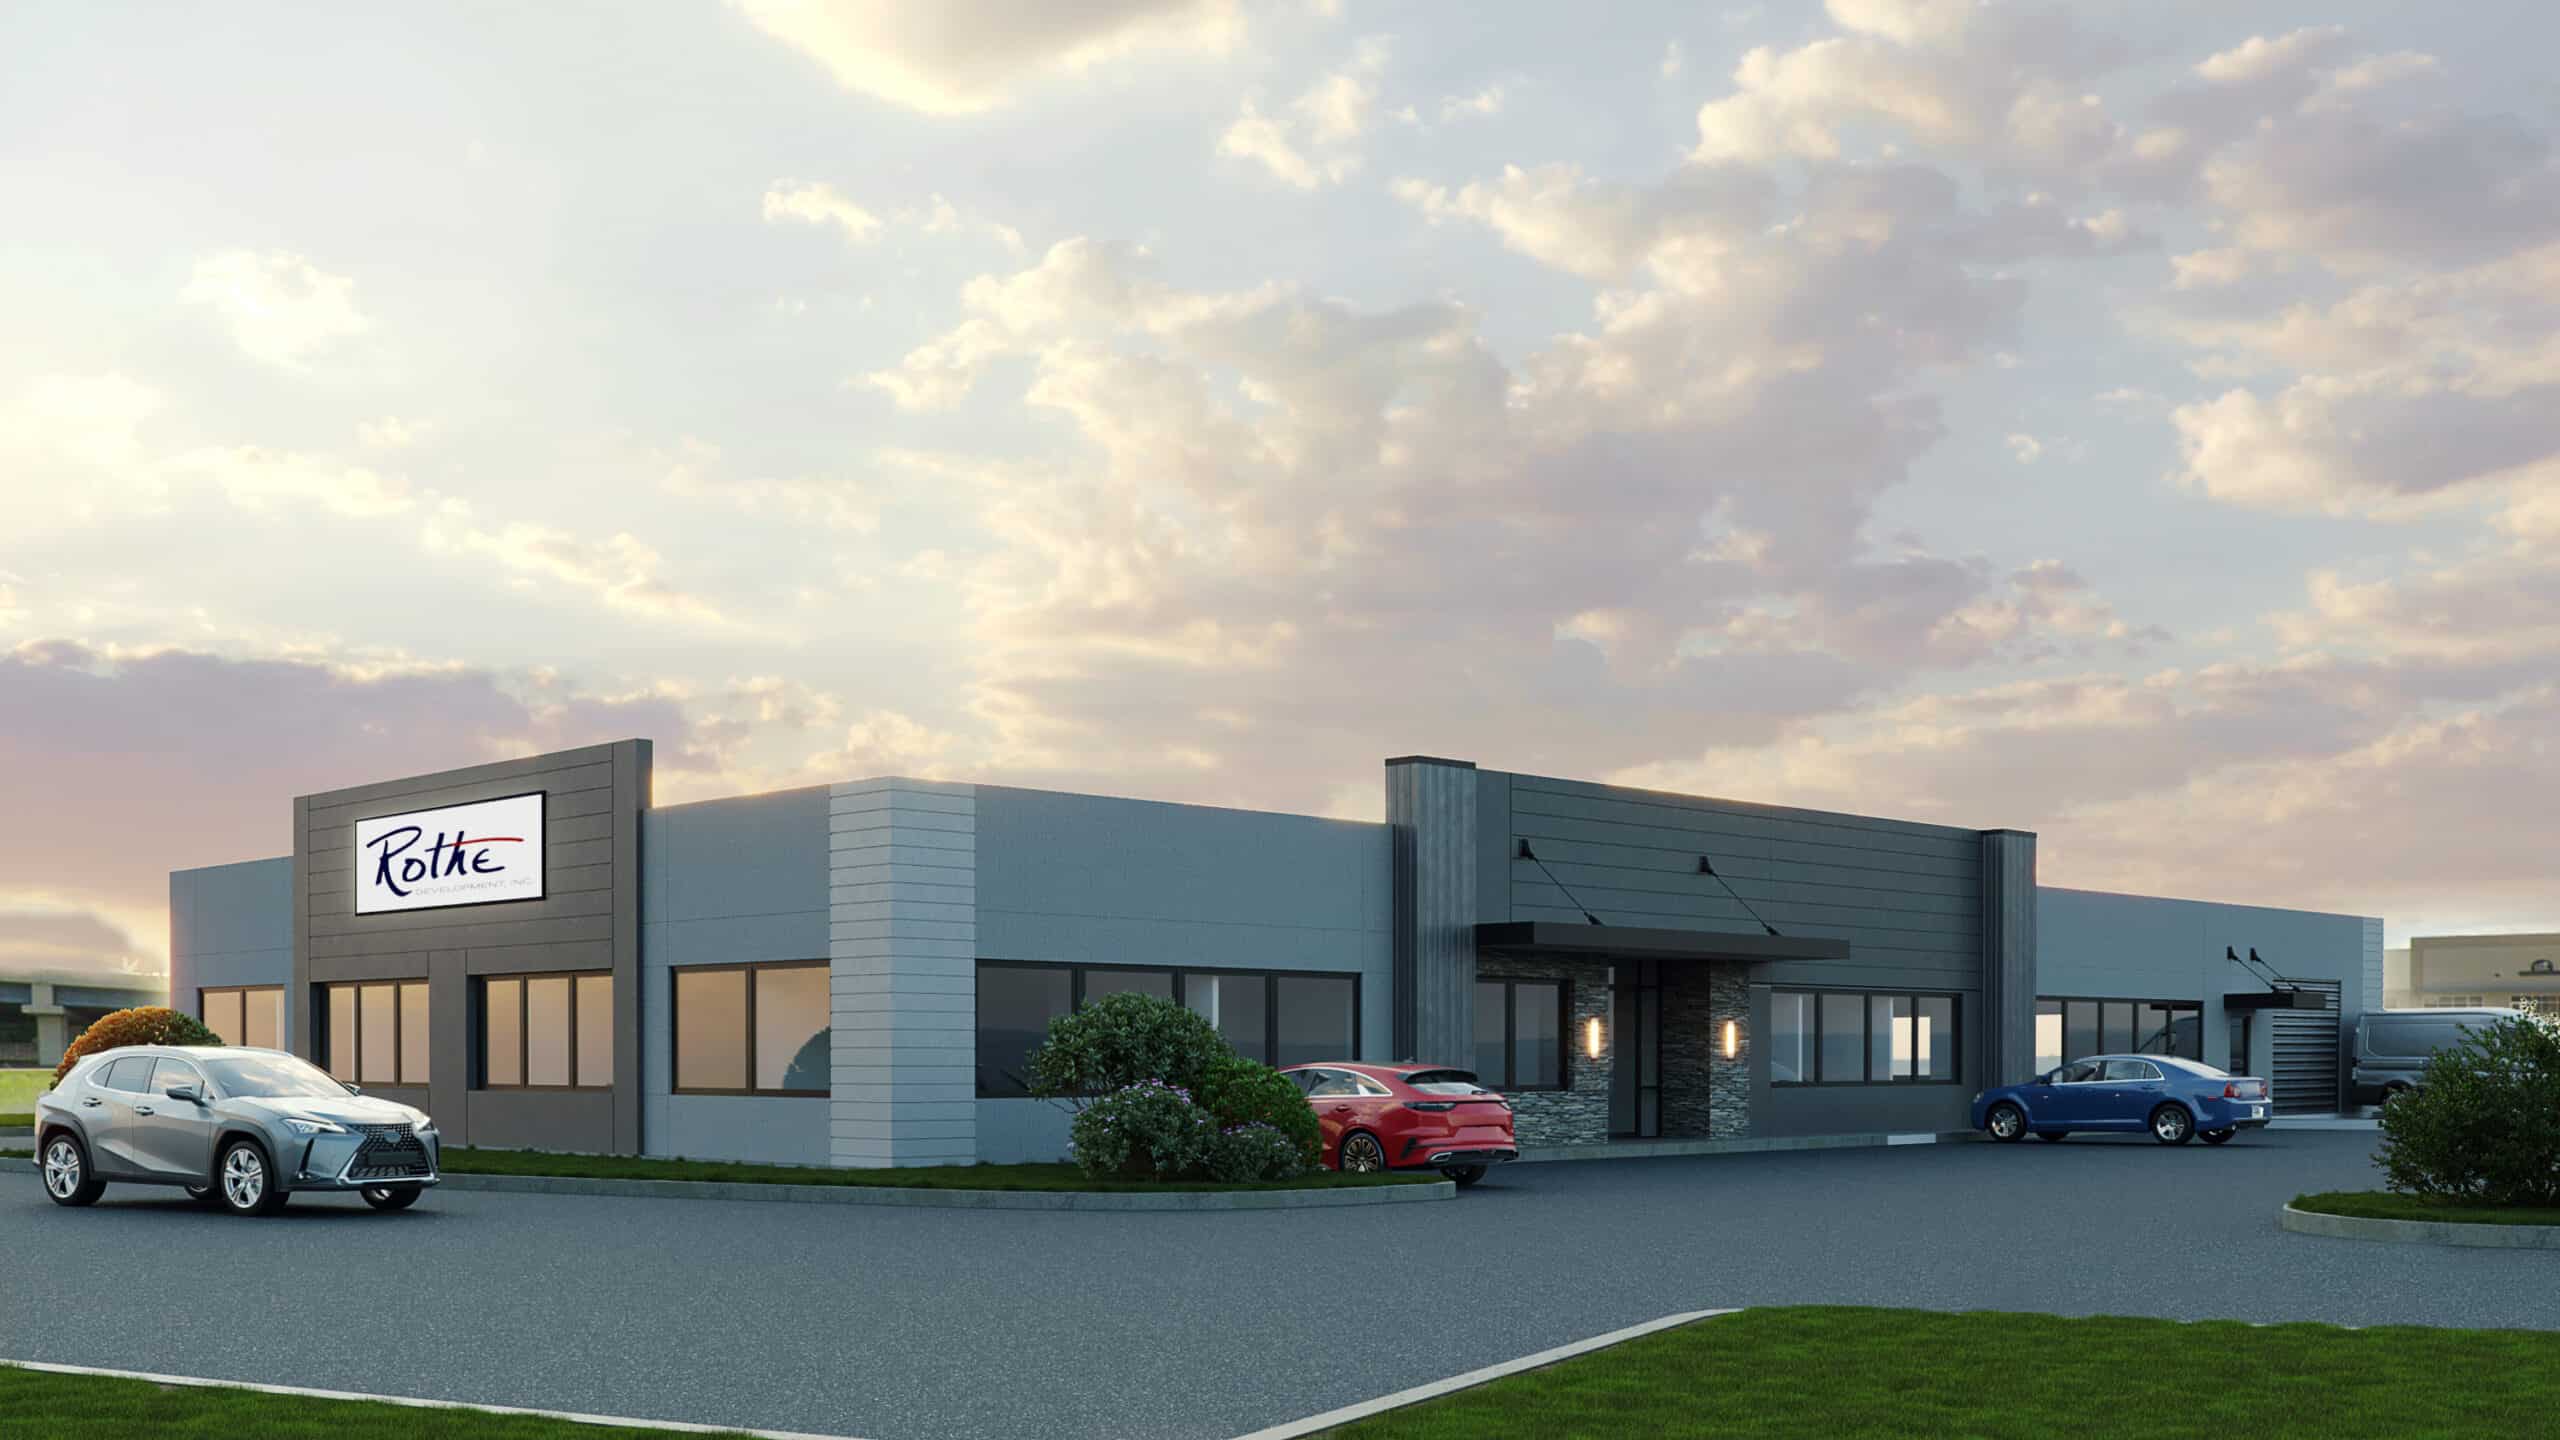 Rothe NEw Building Rendering in Houston